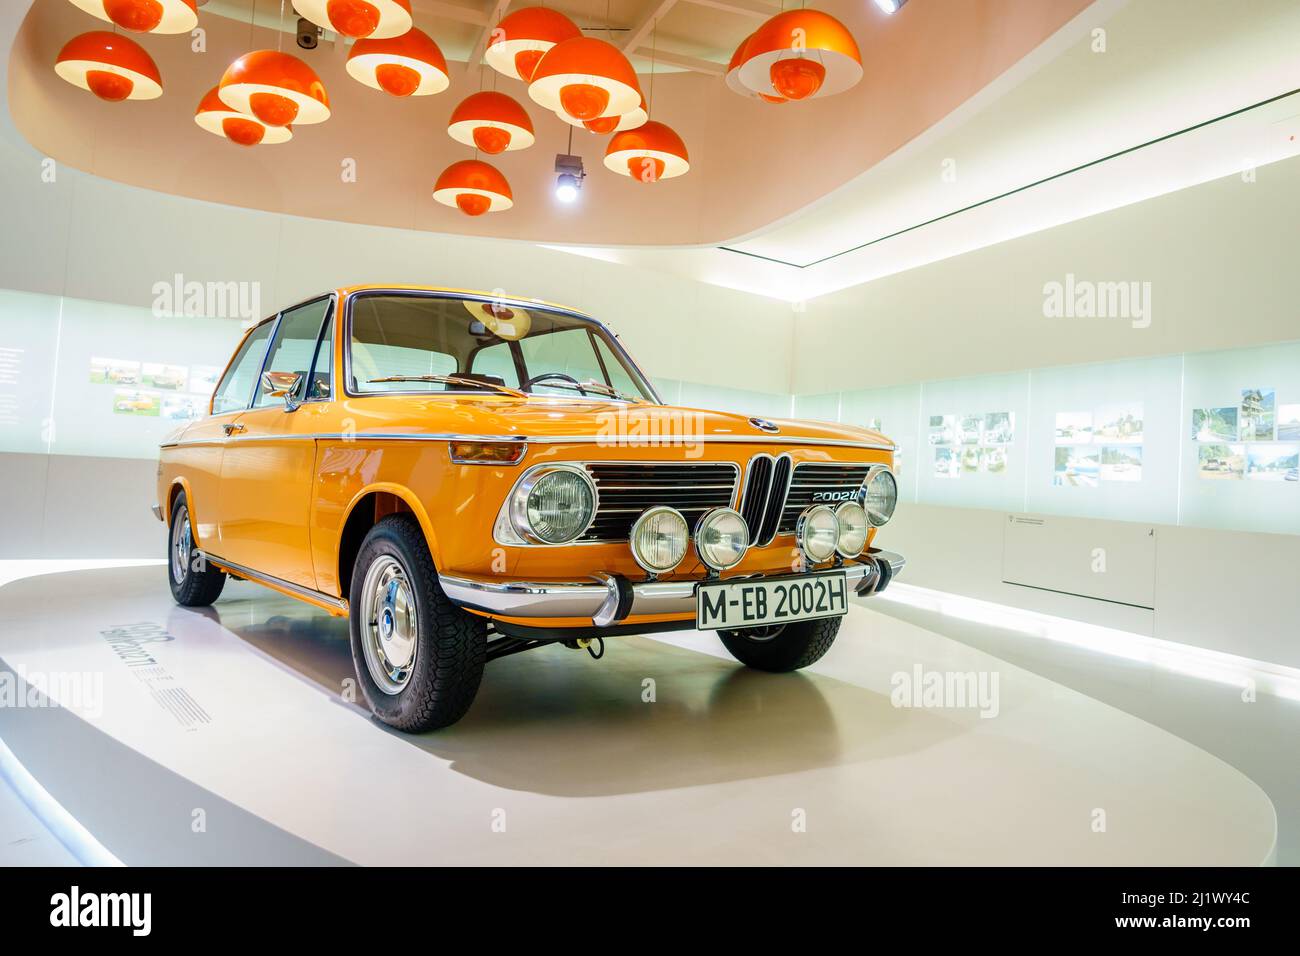 Munich, Germany, September 29, 2015: Famous BMW 2002 Tii on display at BMW Museum in Munich, Germany Stock Photo